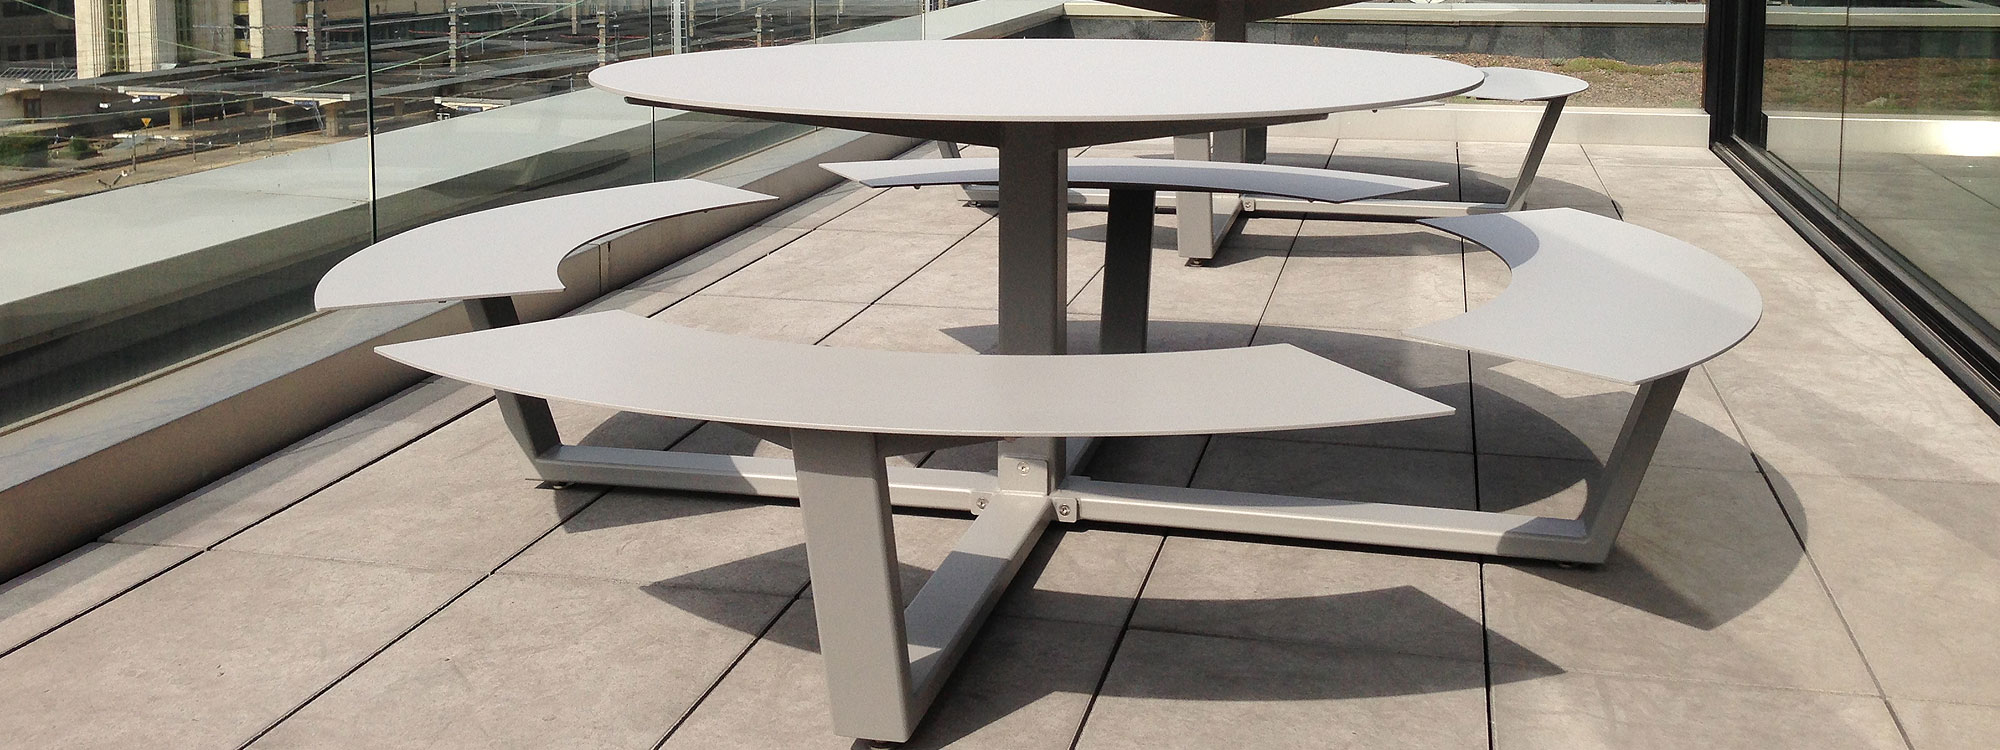 Image of pair of Taupe La Grande Ronde modern picnic tables by Cassecroute, on rooftop terrace